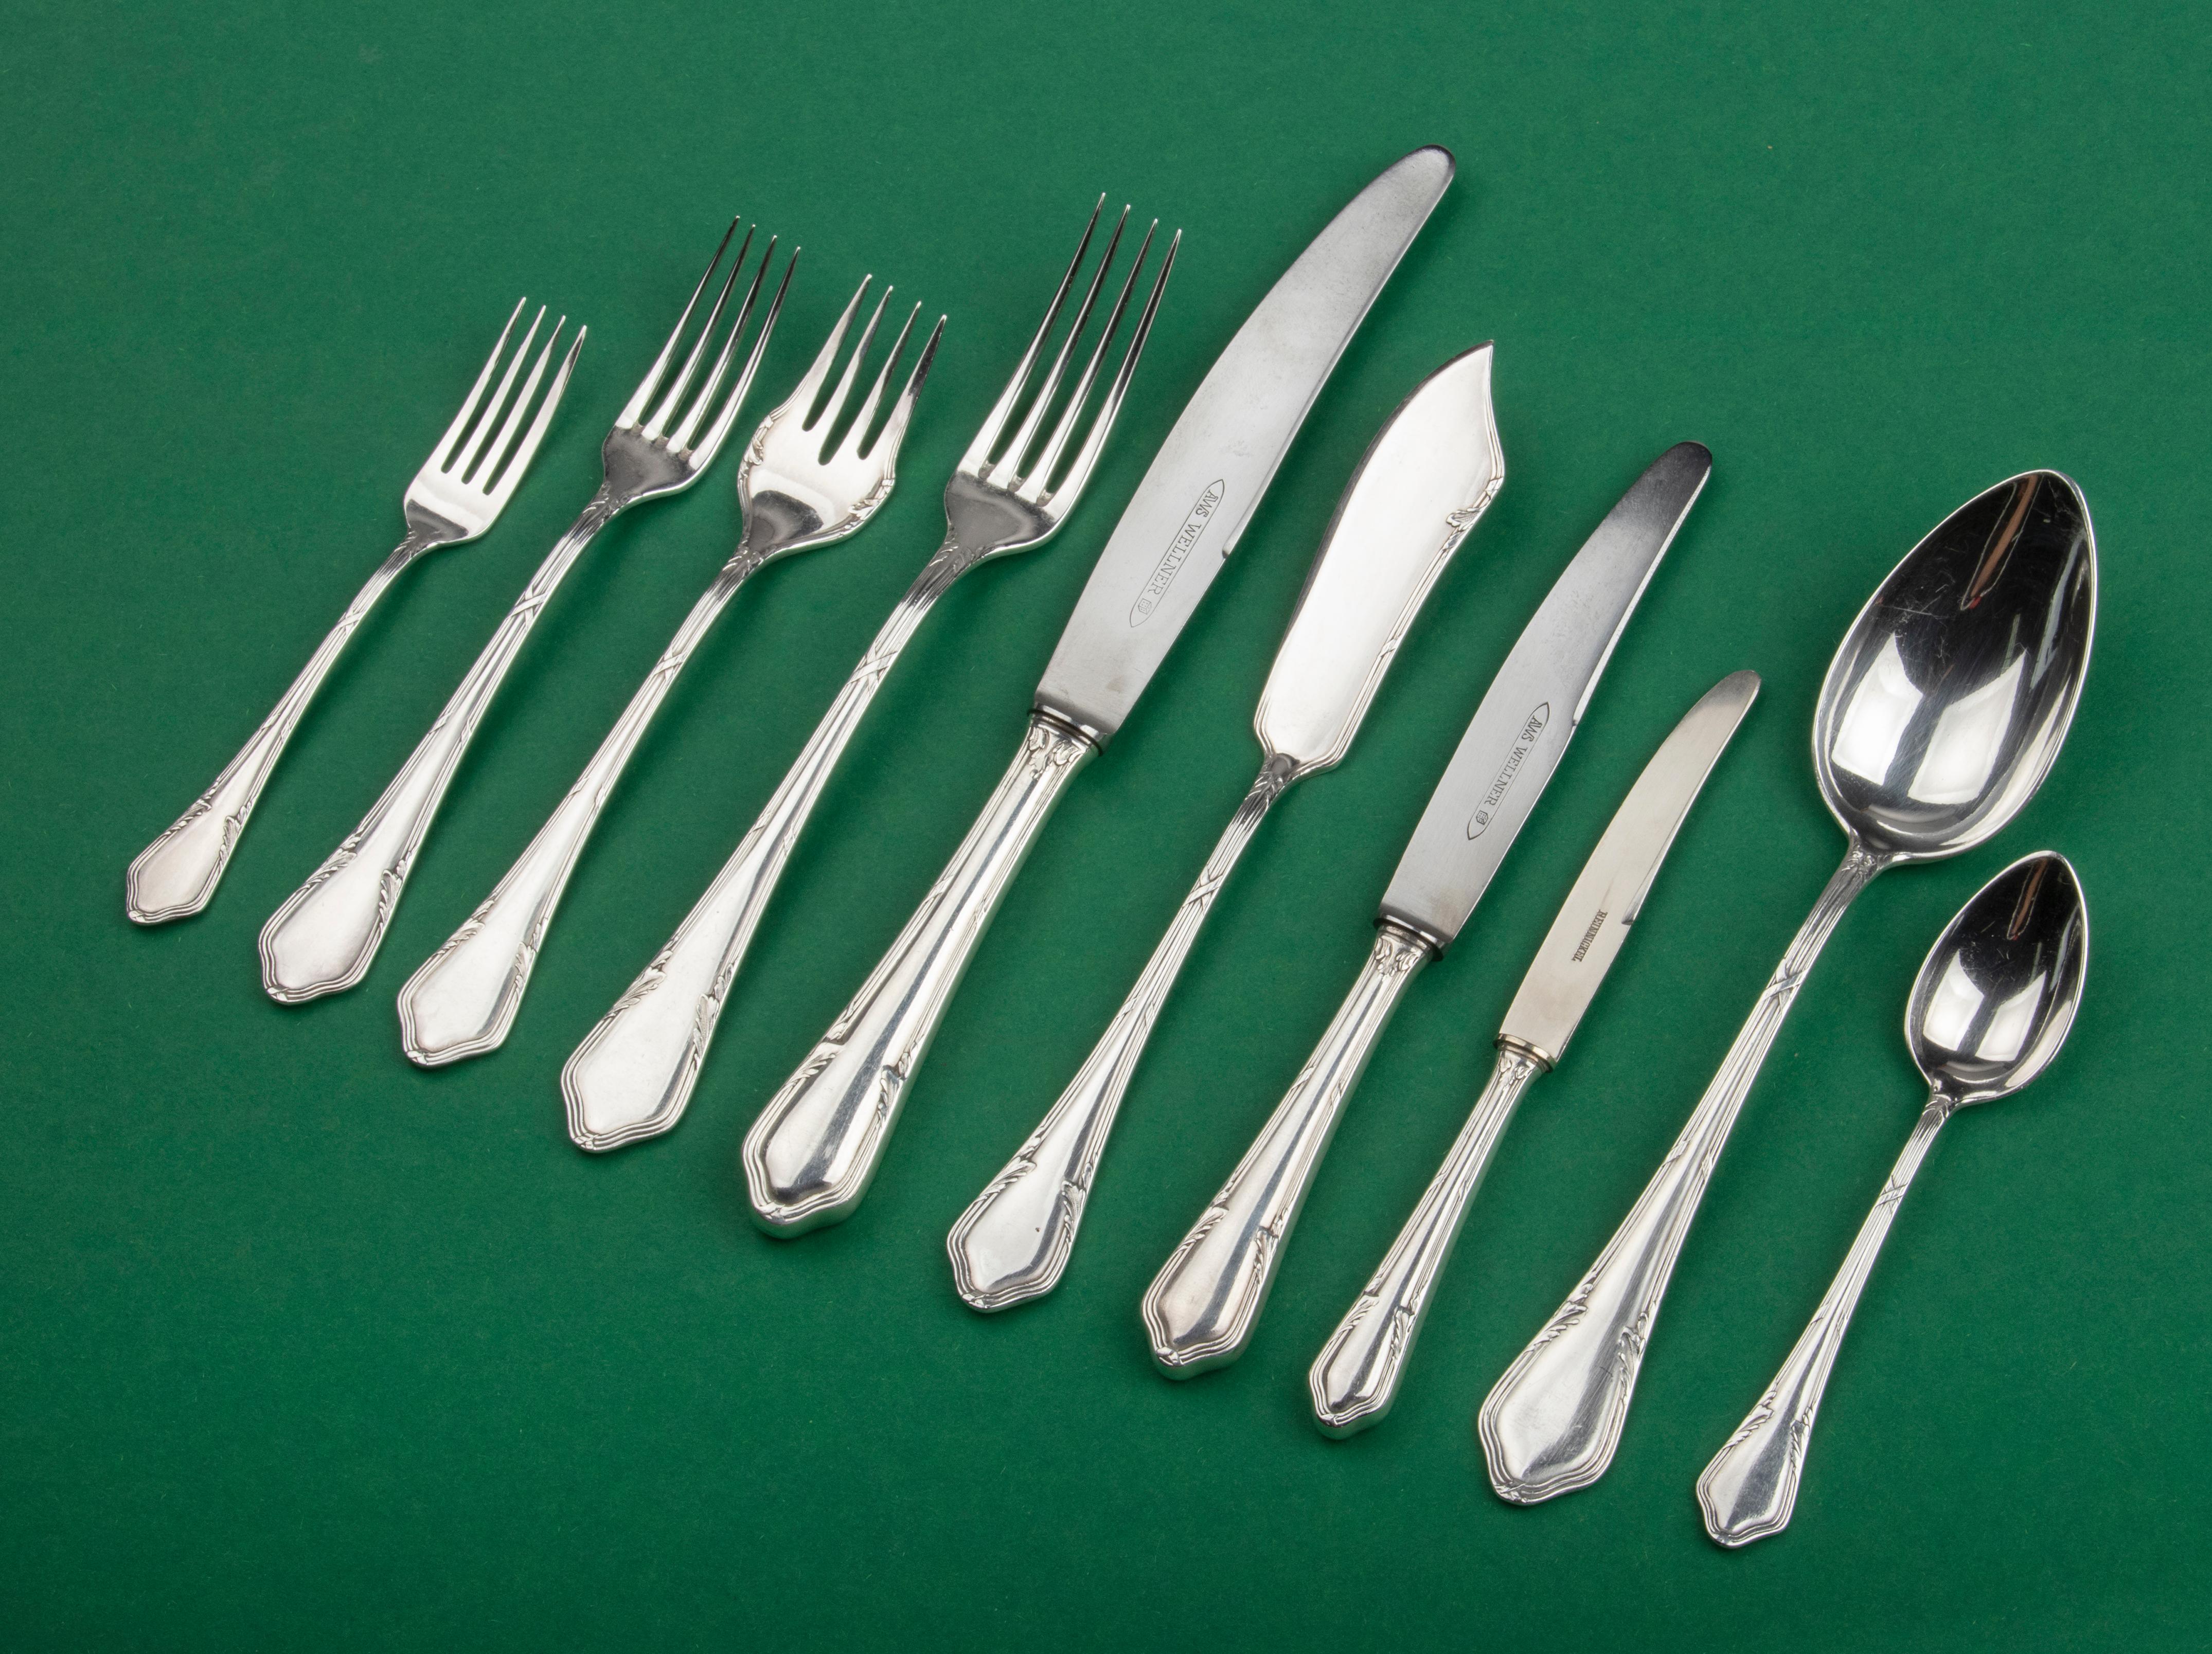 Nice set of silver plated flatware for 12 persons made by August Wellner and Sons, Germany. The cutlery has a cross band pattern. The silver color is beautiful, with a nice shine. The cutlery comes in the original case. The set is composed as